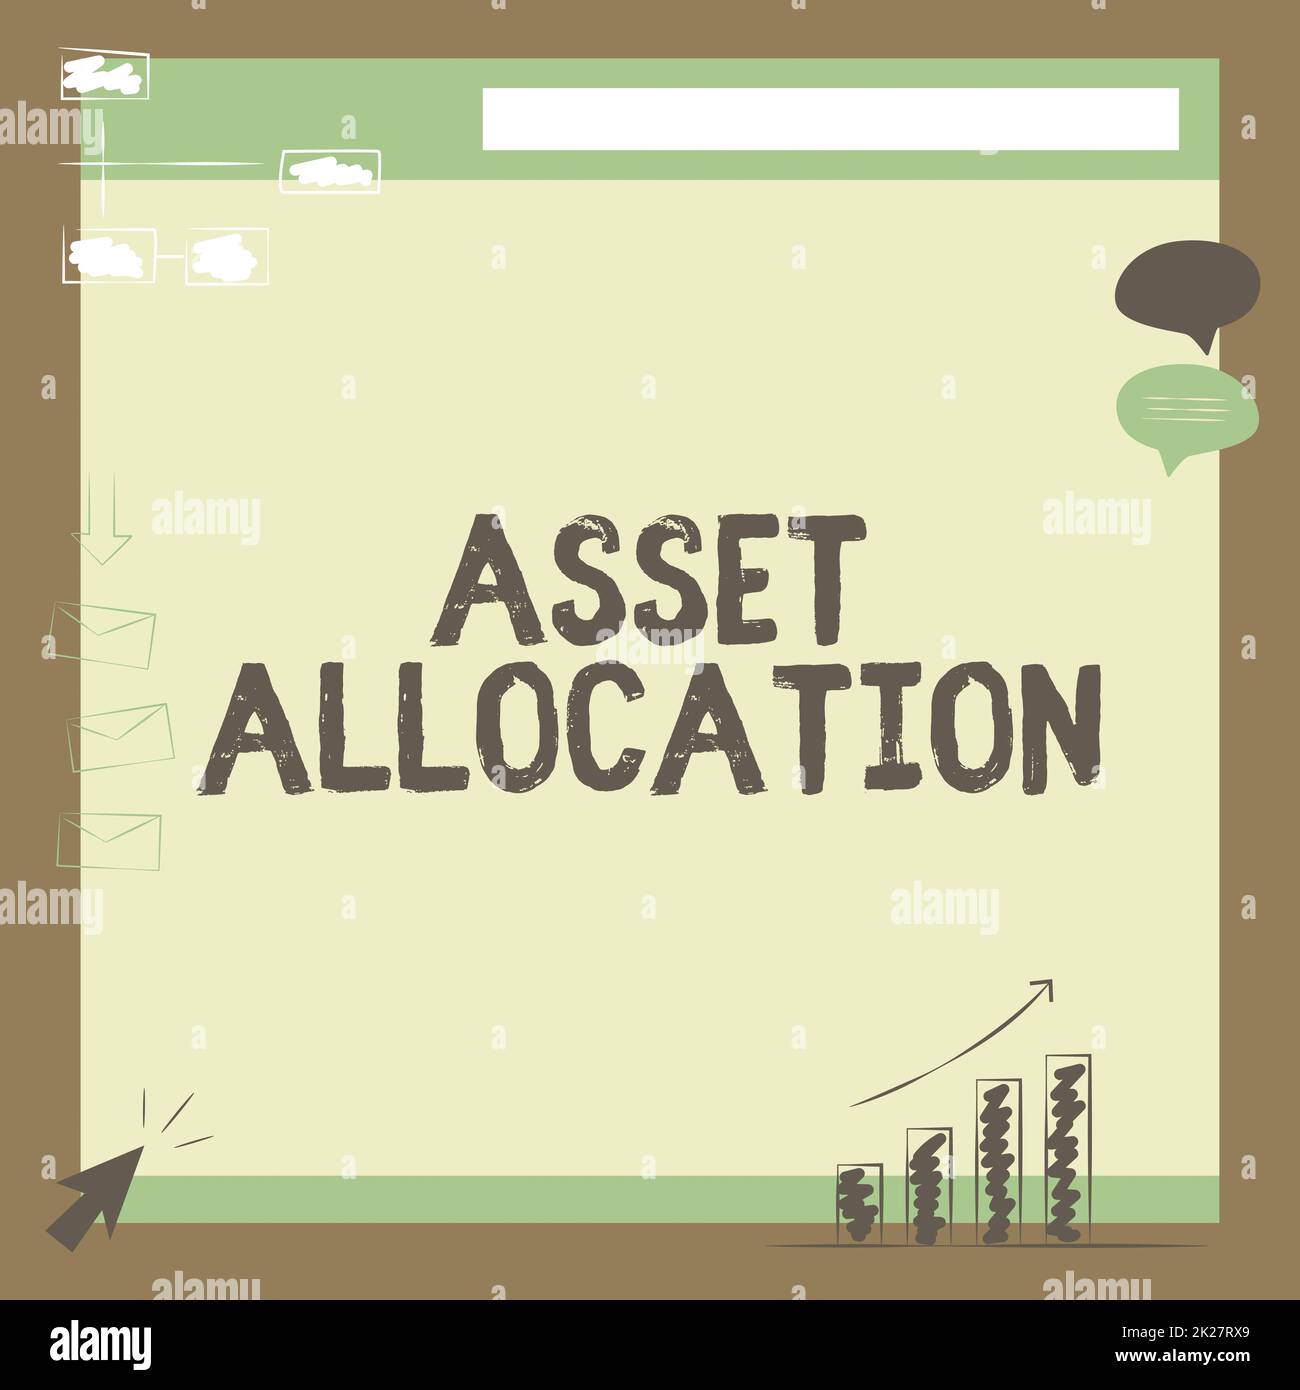 Handwriting text Asset Allocation. Business overview proportion and implementation strategy to gain advantage Illustration Of Board Receiving Messages And Searching Improvements. Stock Photo